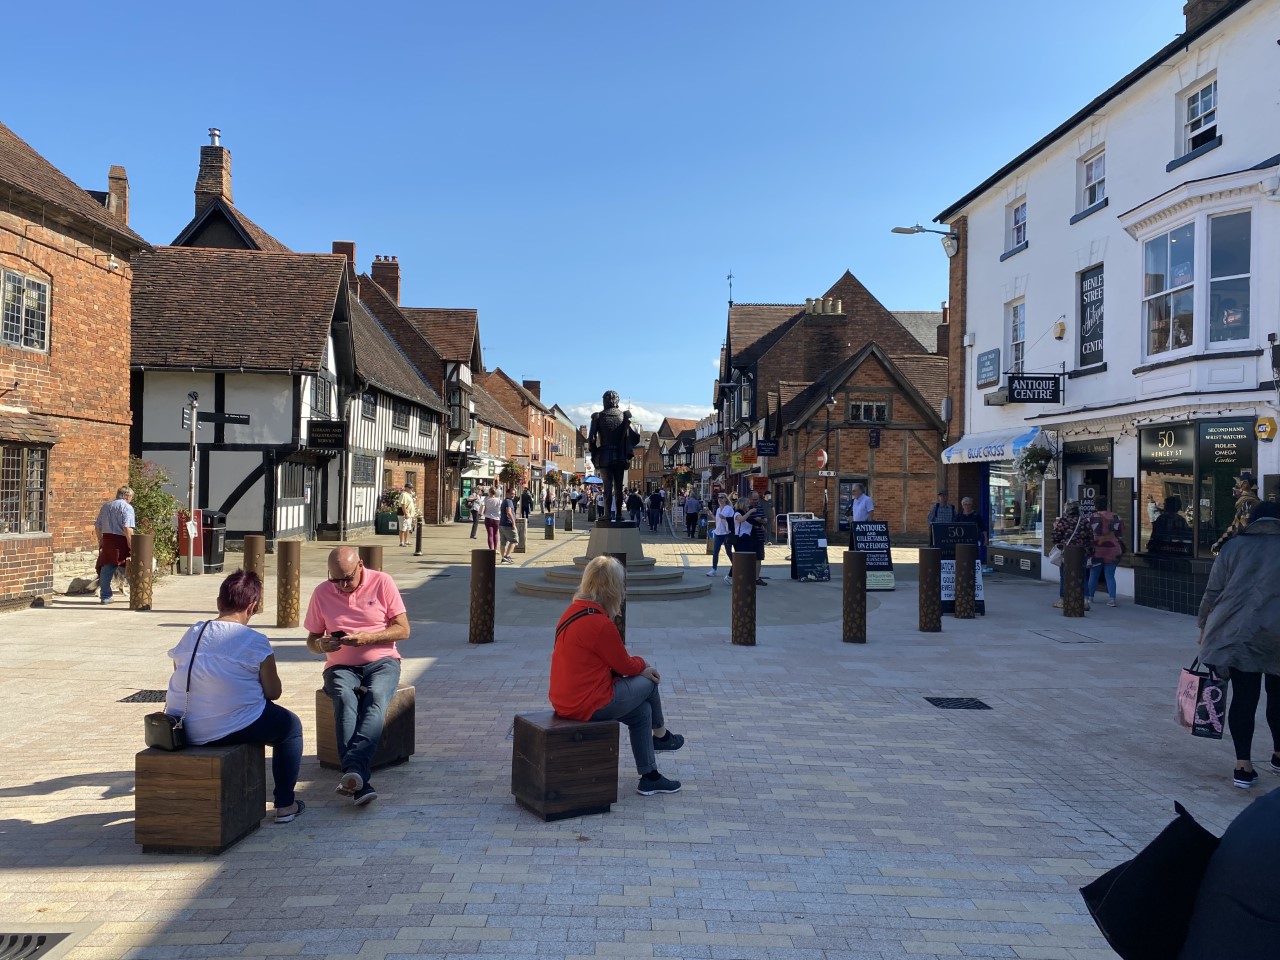 Street furniture can protect against hostile vehicle attack as seen here in Stratford-upon-Avon - CPNI